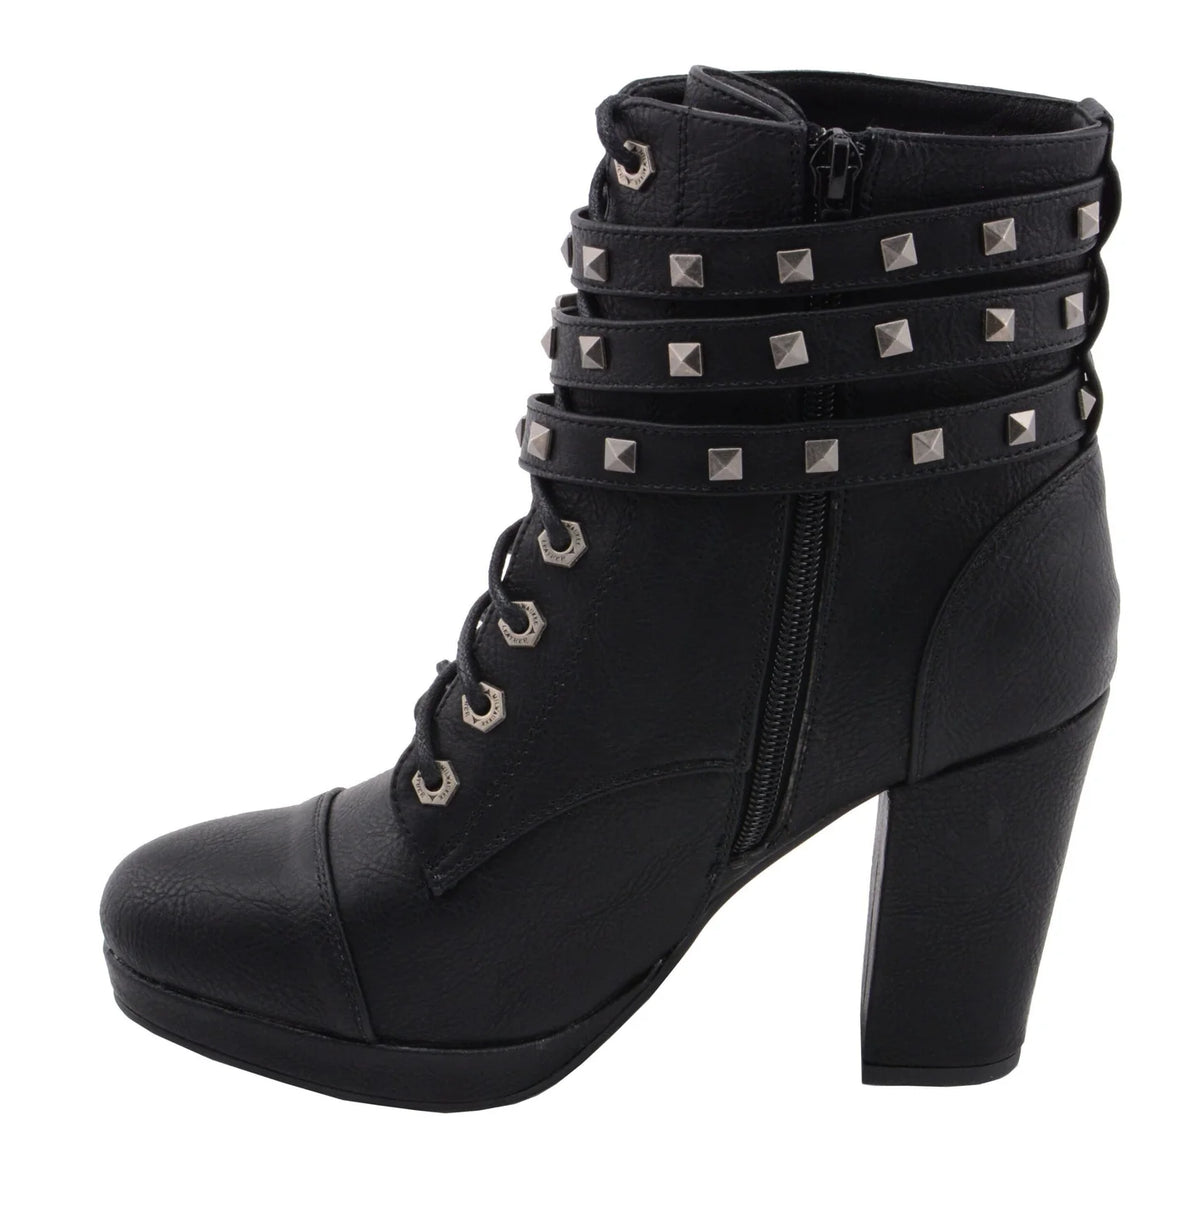 Womens Black Lace-Up Boots with Triple Strap Studded Accents